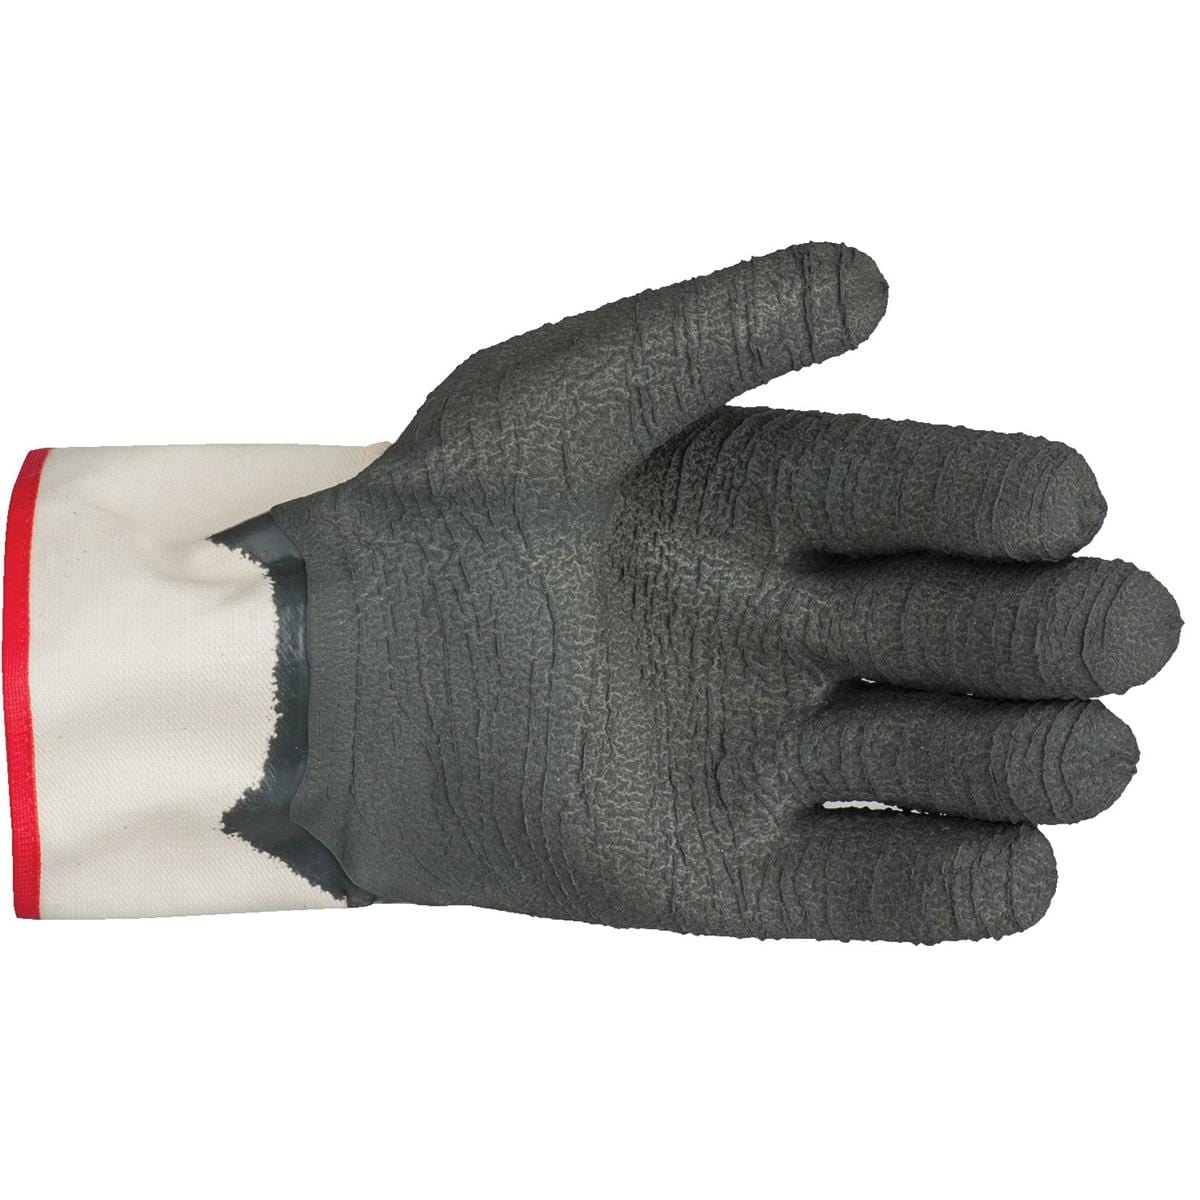 Showa 3910 Double Coated Work Gloves with Safety Cuff